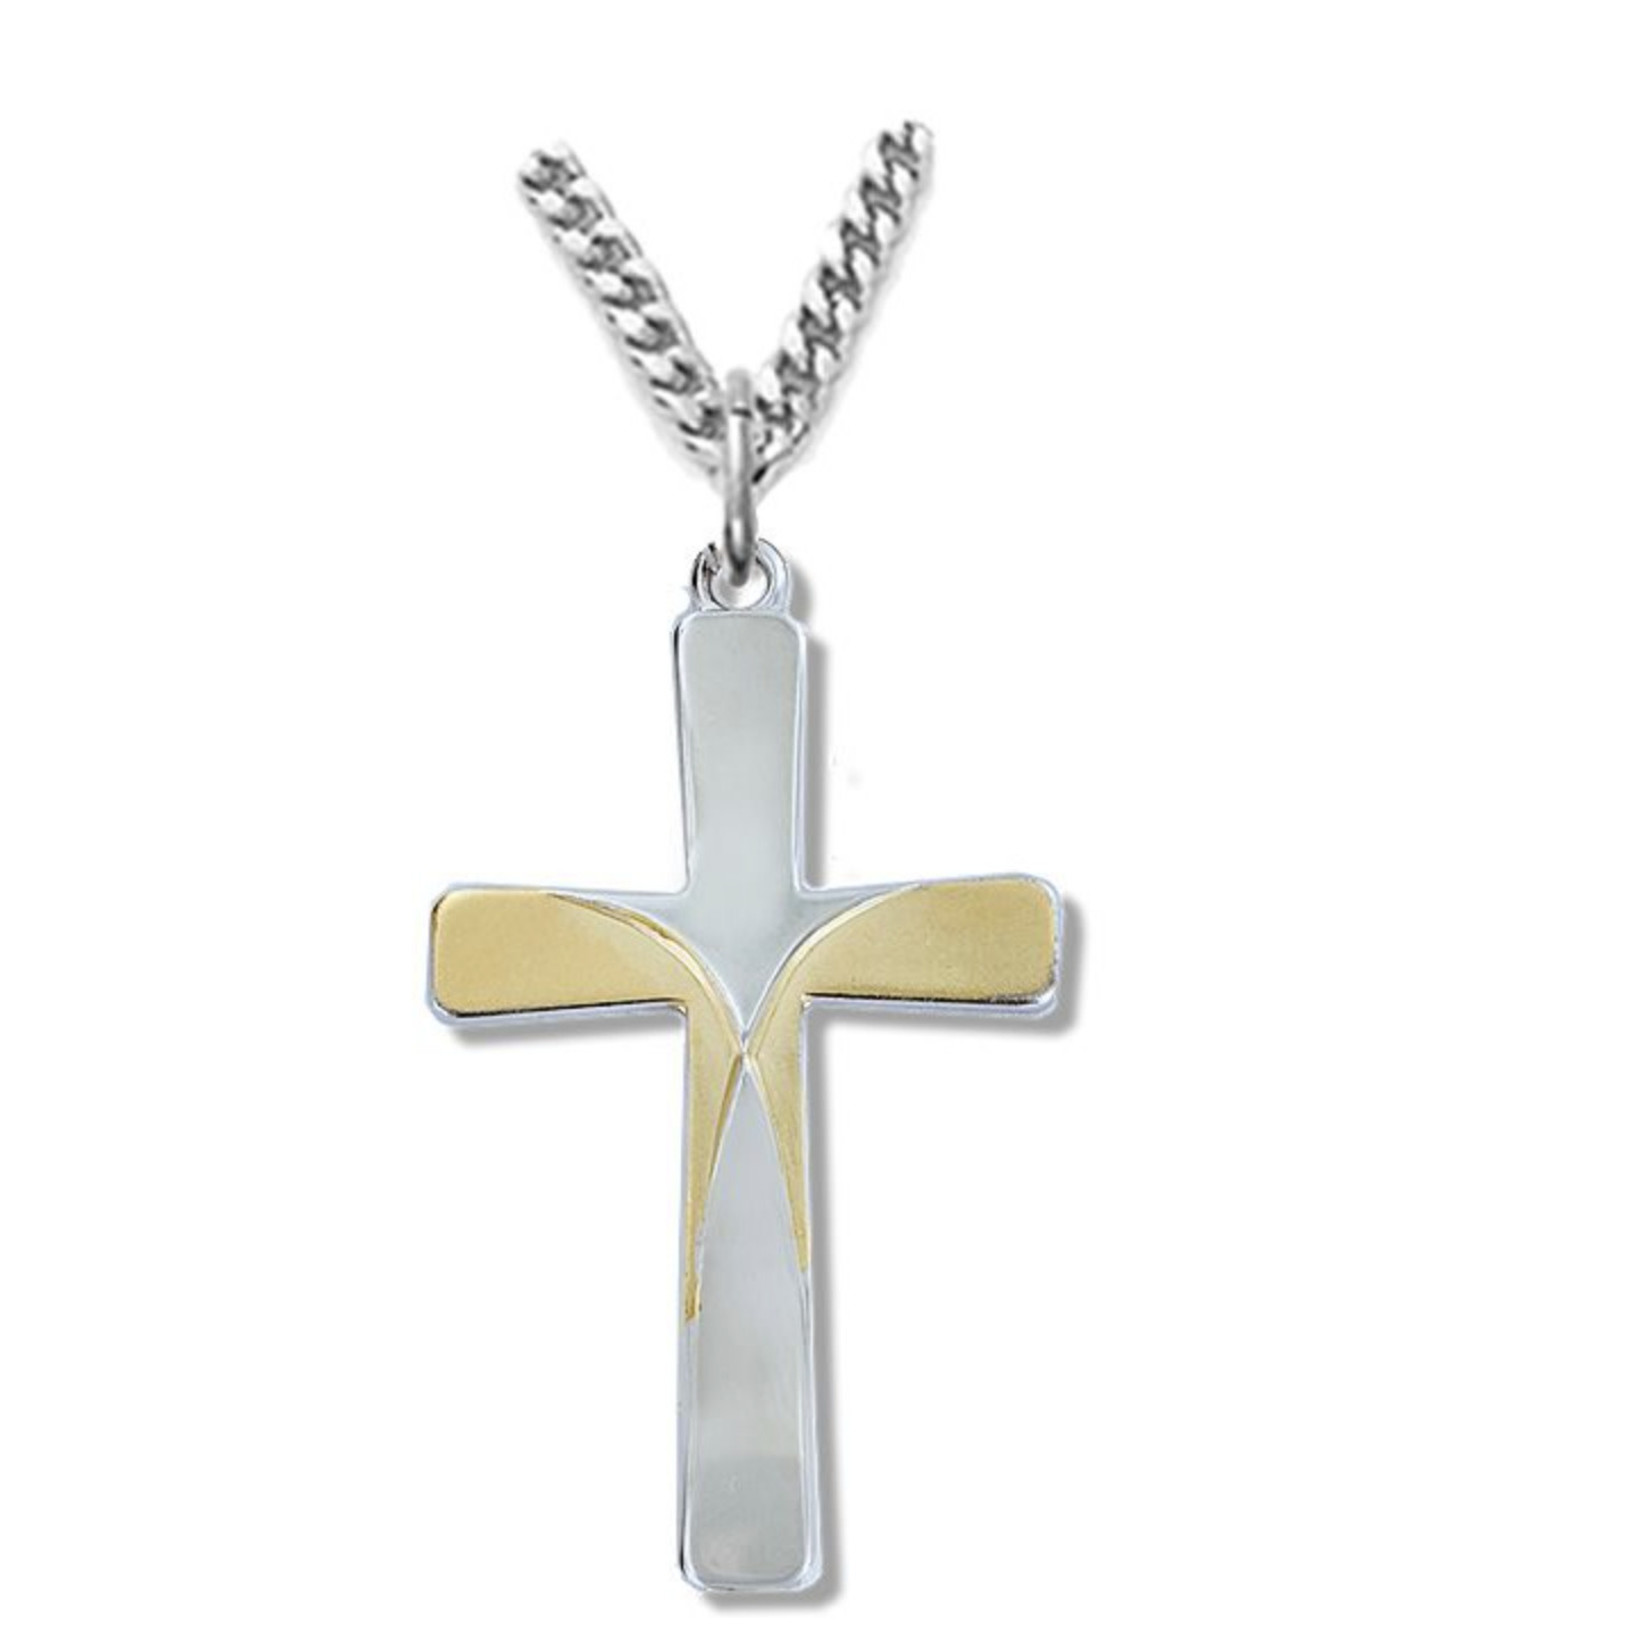 Two-Tone Sterling Silver Engraved Cross Necklace with 24" Chain